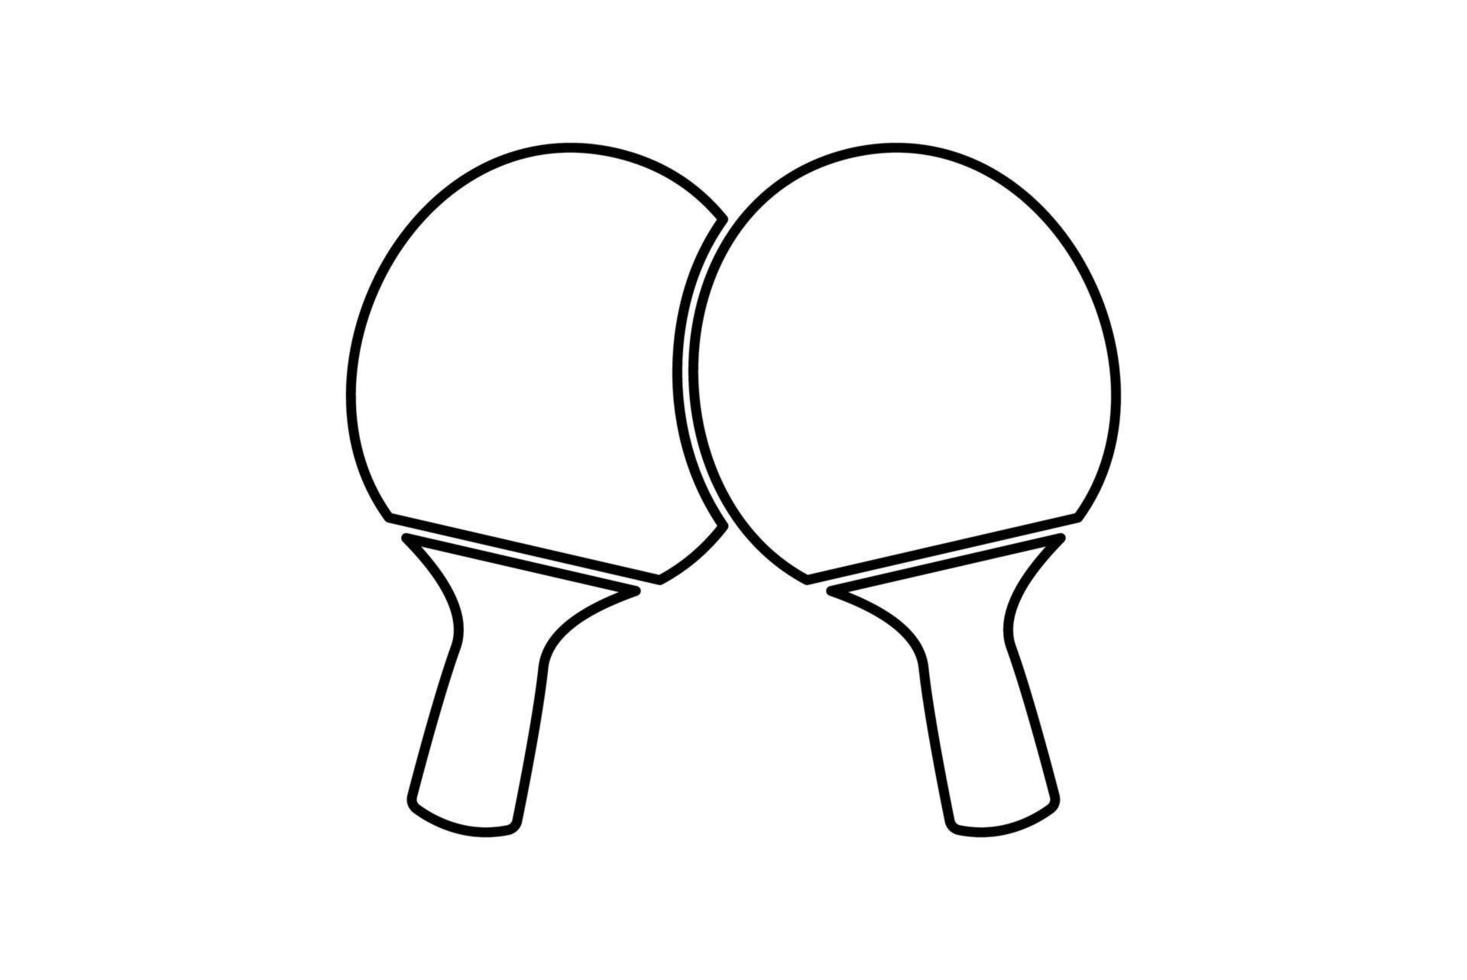 ping pong racket icon. Two crossed ping pong rackets. Table tennis black and white line icon vector